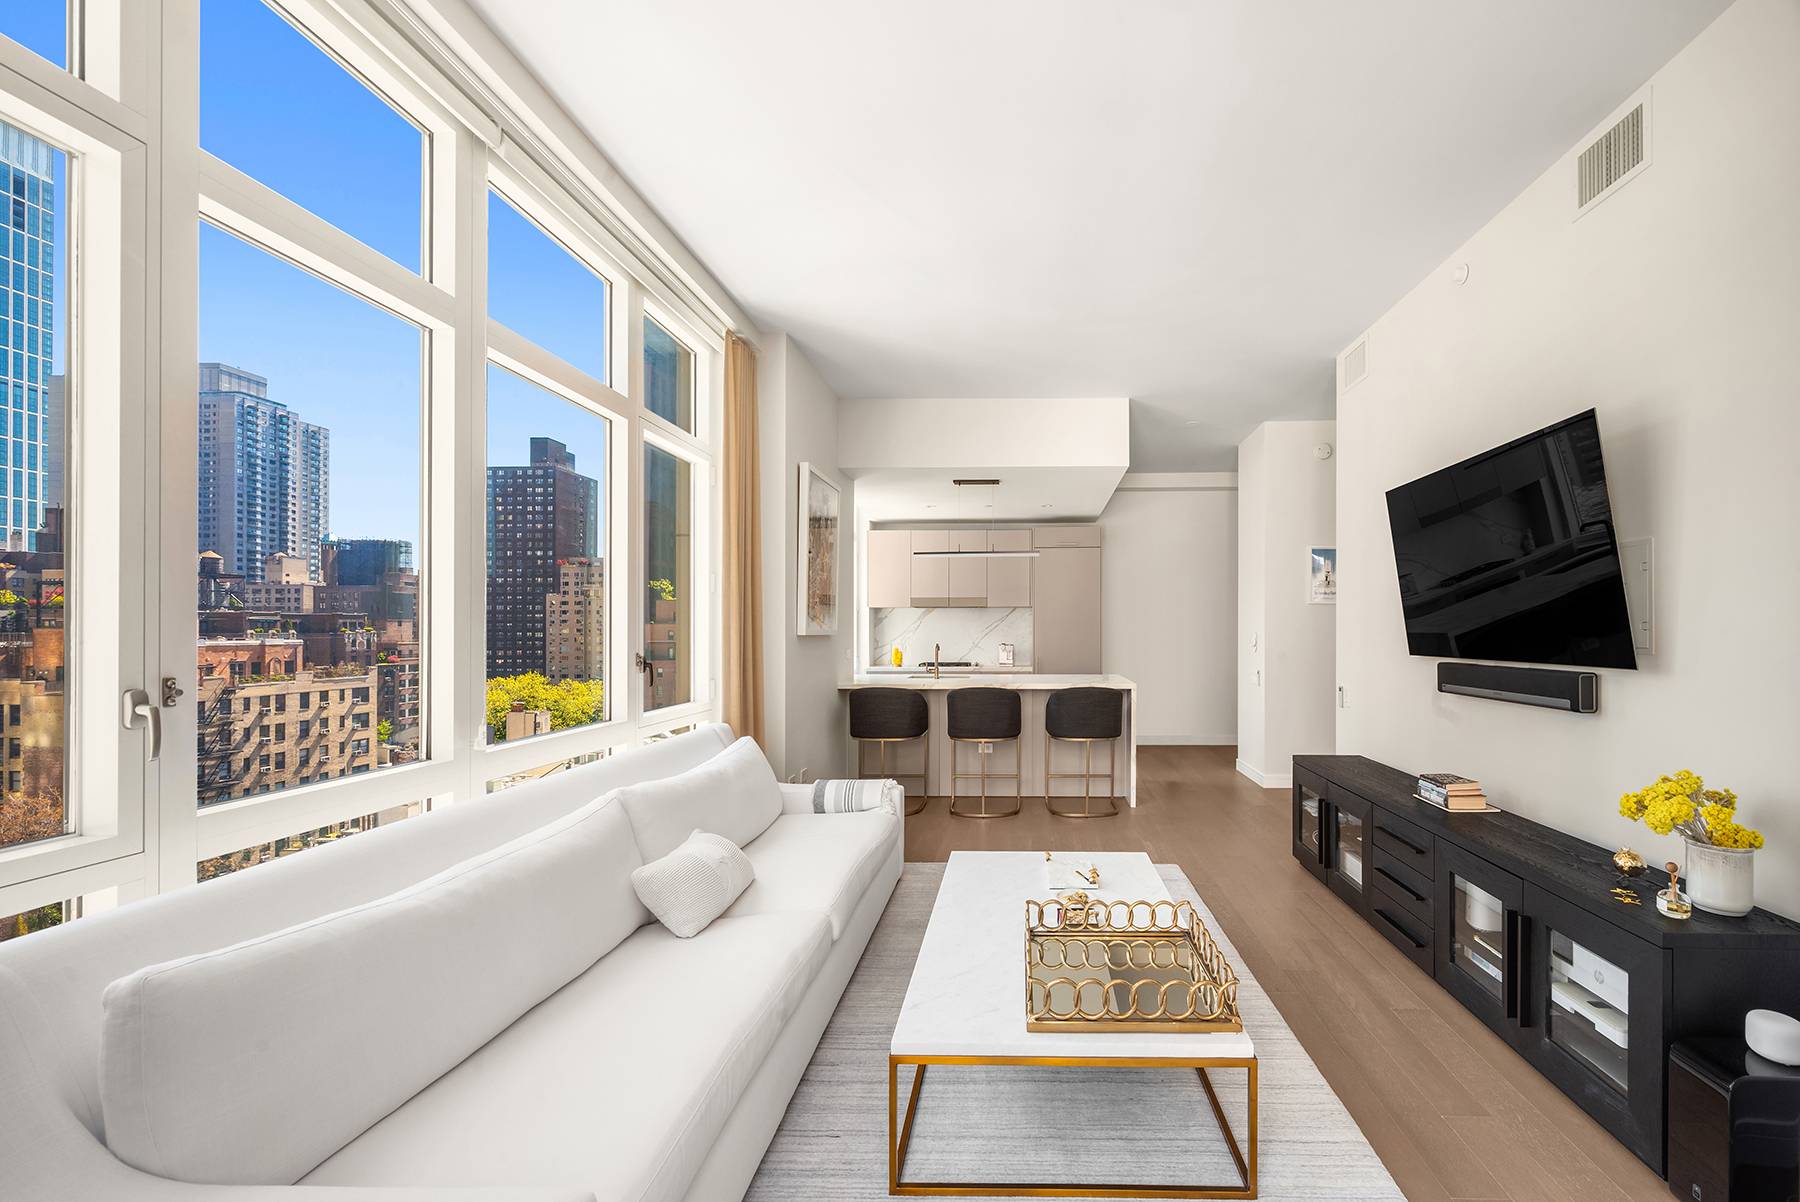 Welcome to a generously sized, luminous, and impeccably kept 1 bedroom residence nestled in the vibrant heart of Manhattan.